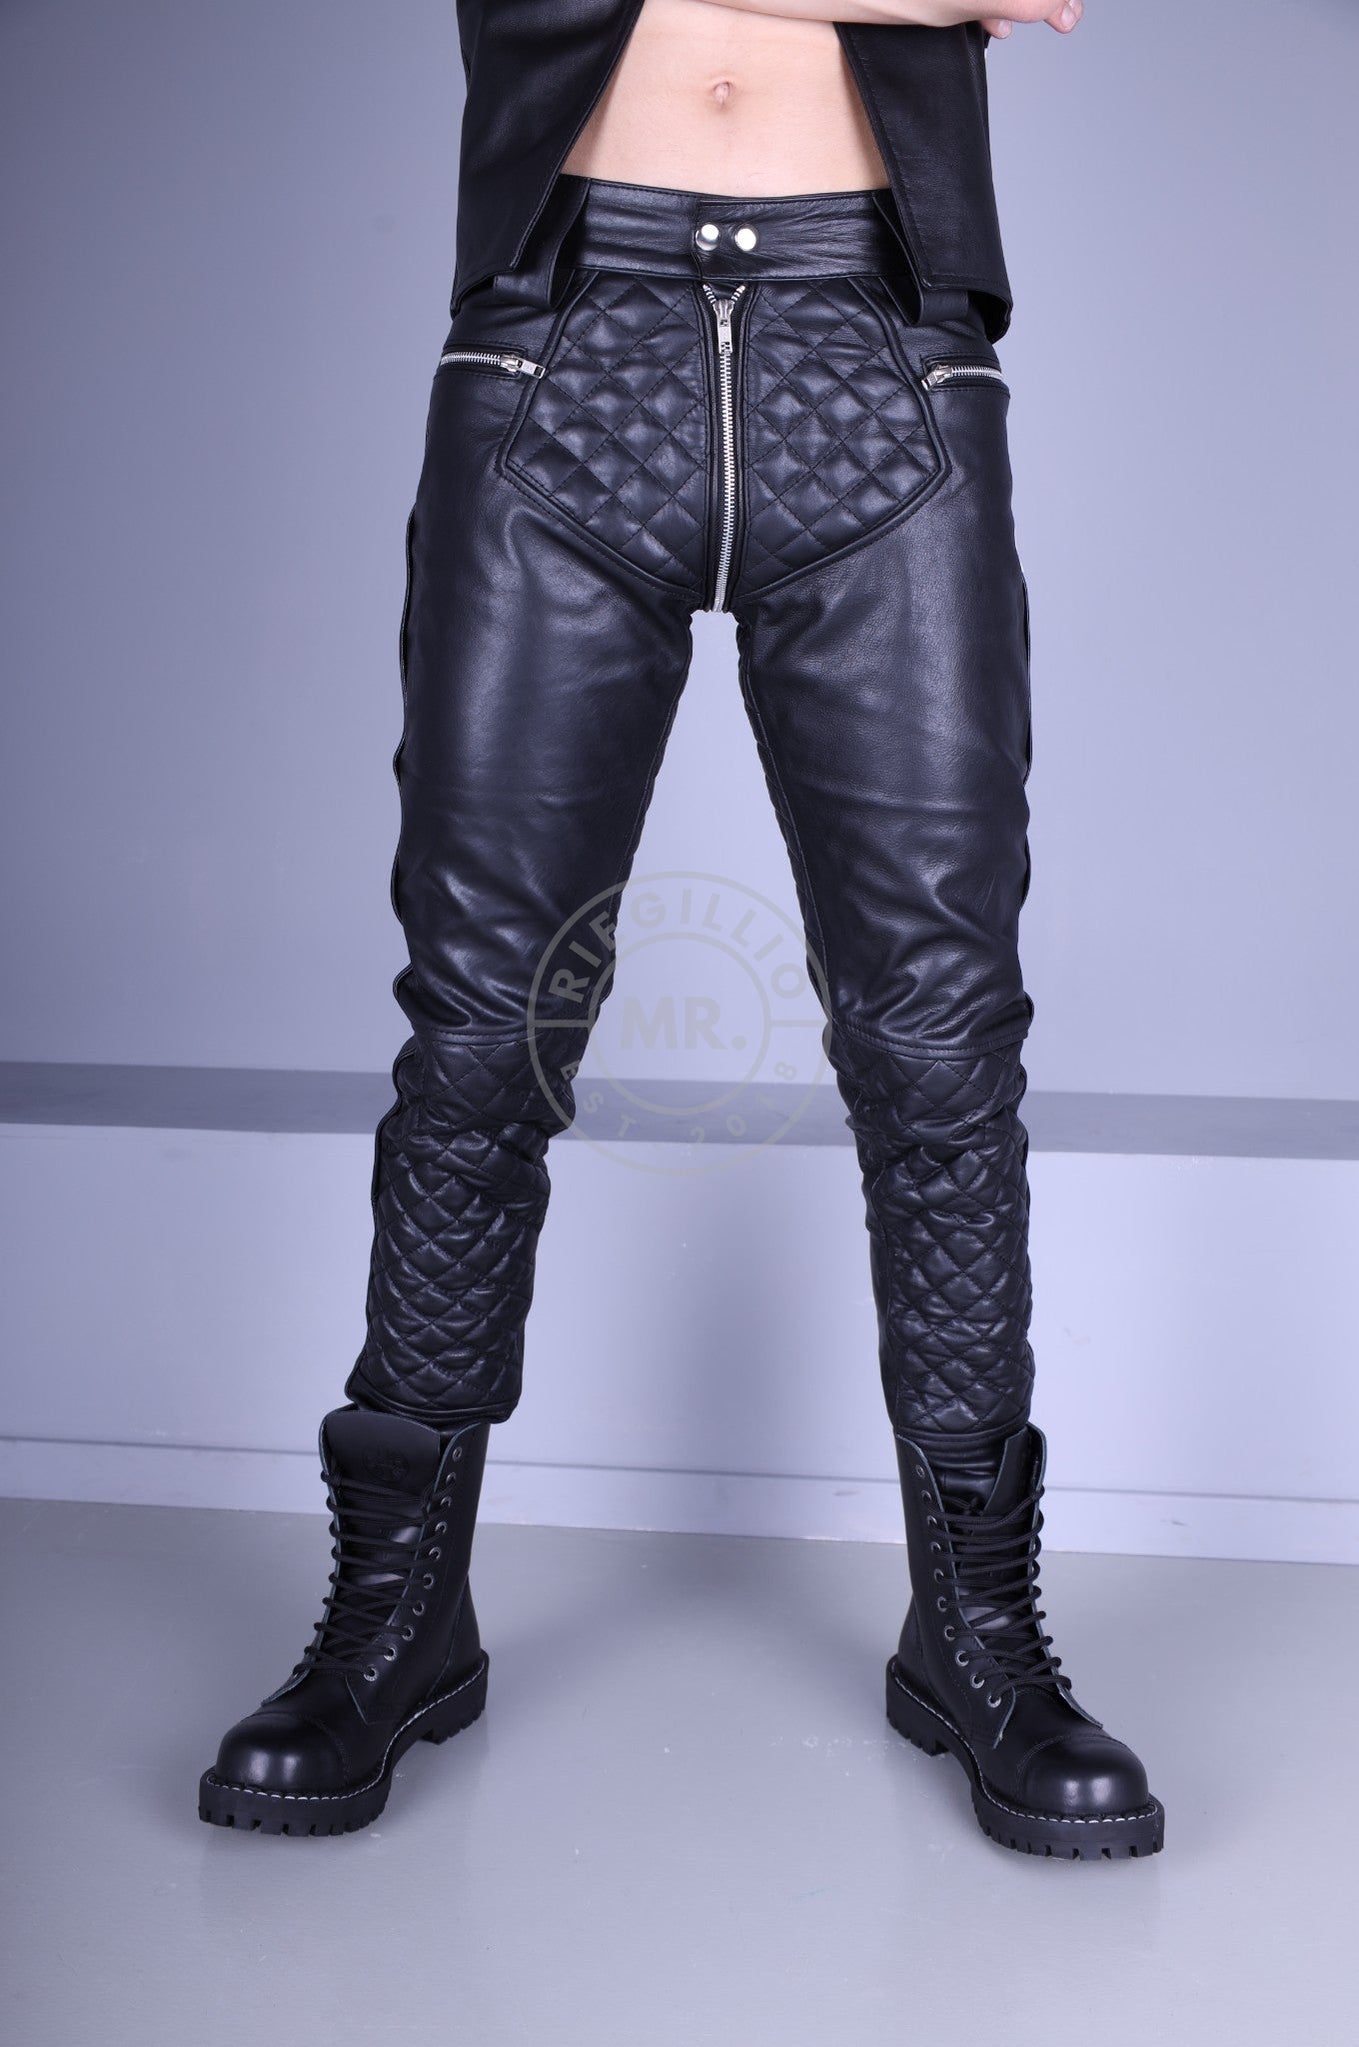 Padded Leather Pants - Black Piping at MR. Riegillio